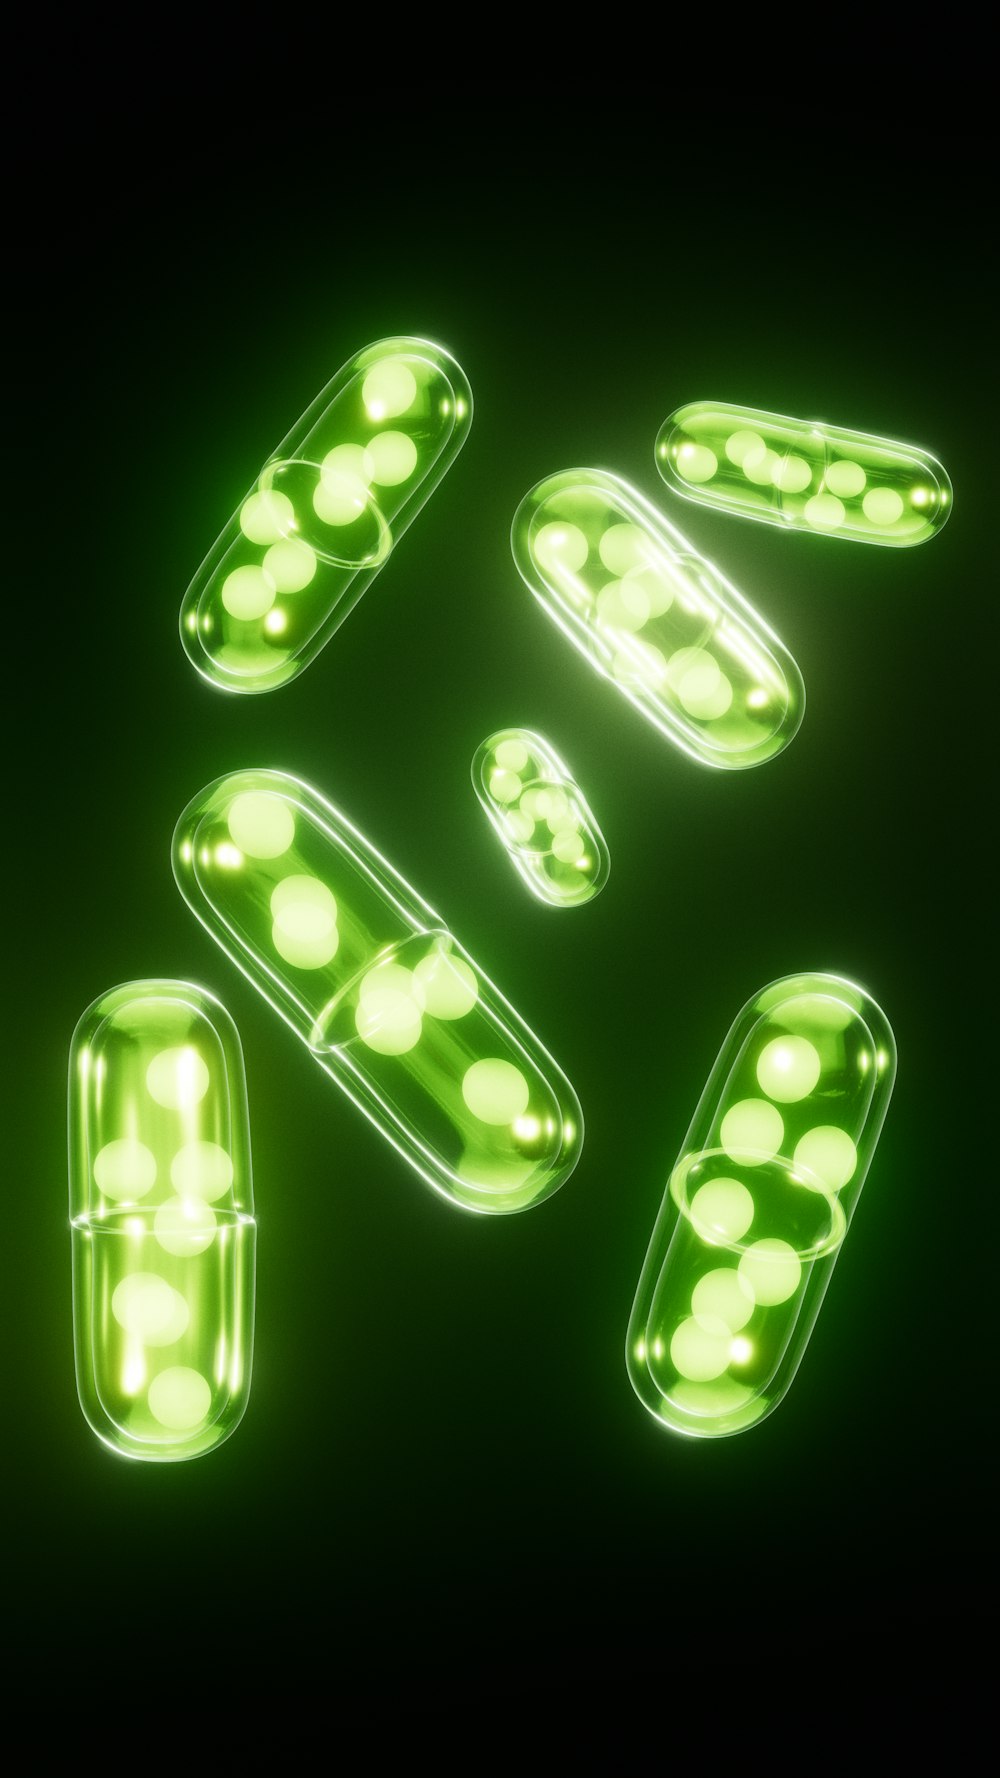 green pills are arranged on a black background